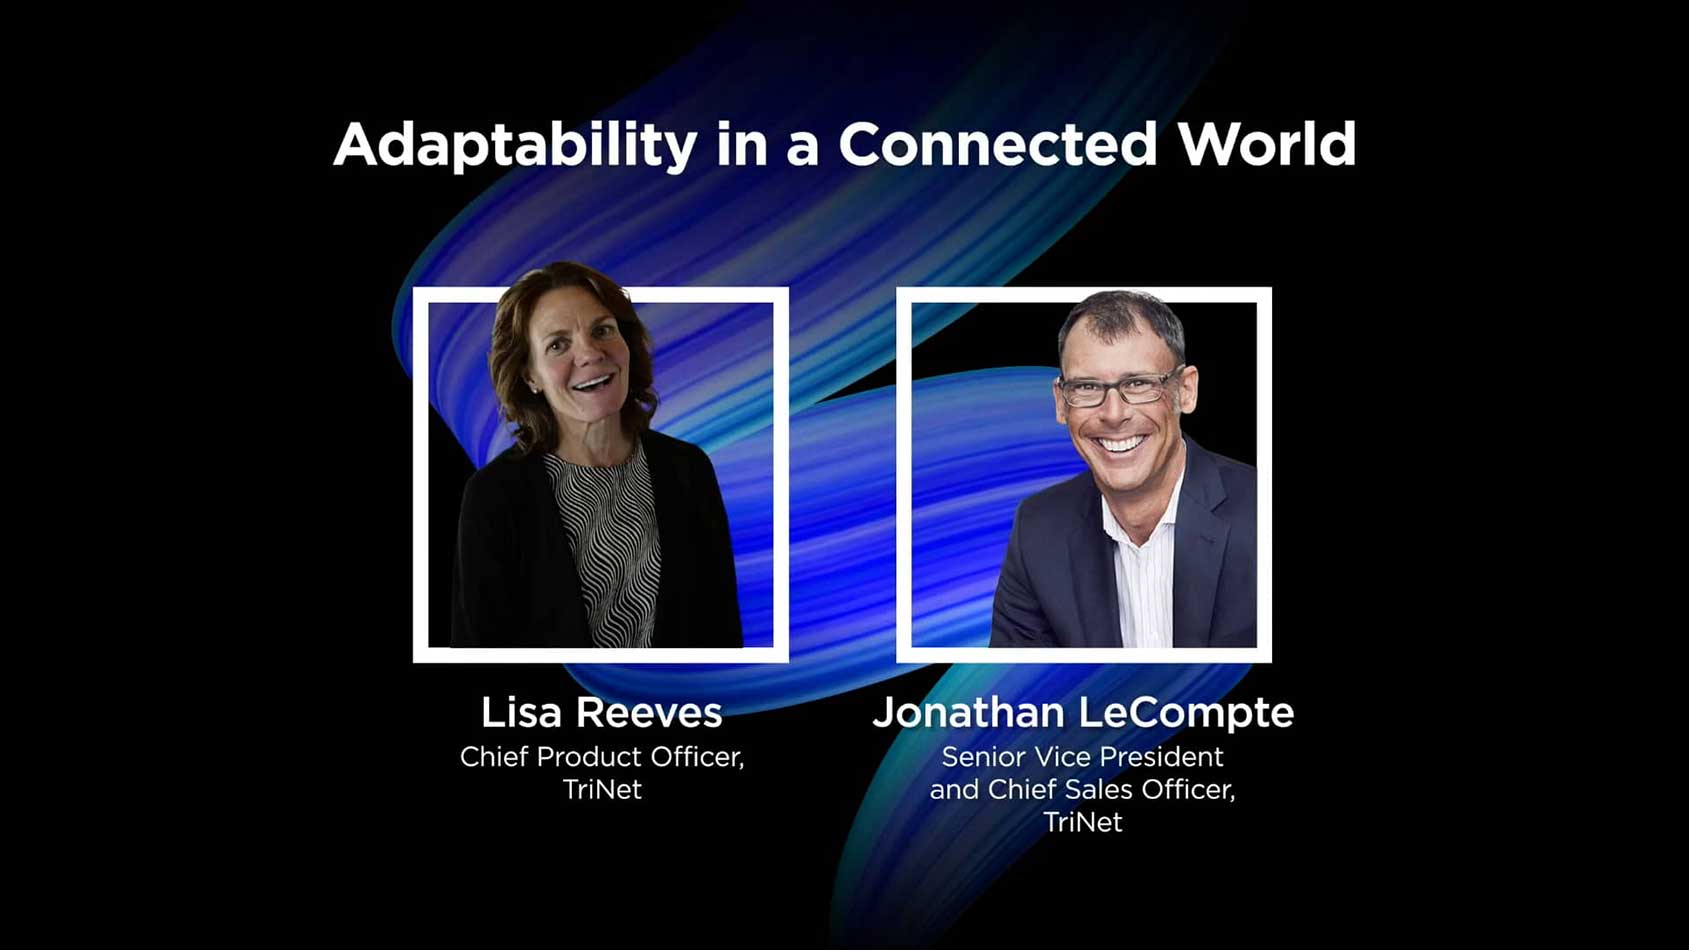 Adaptability in a Connected World